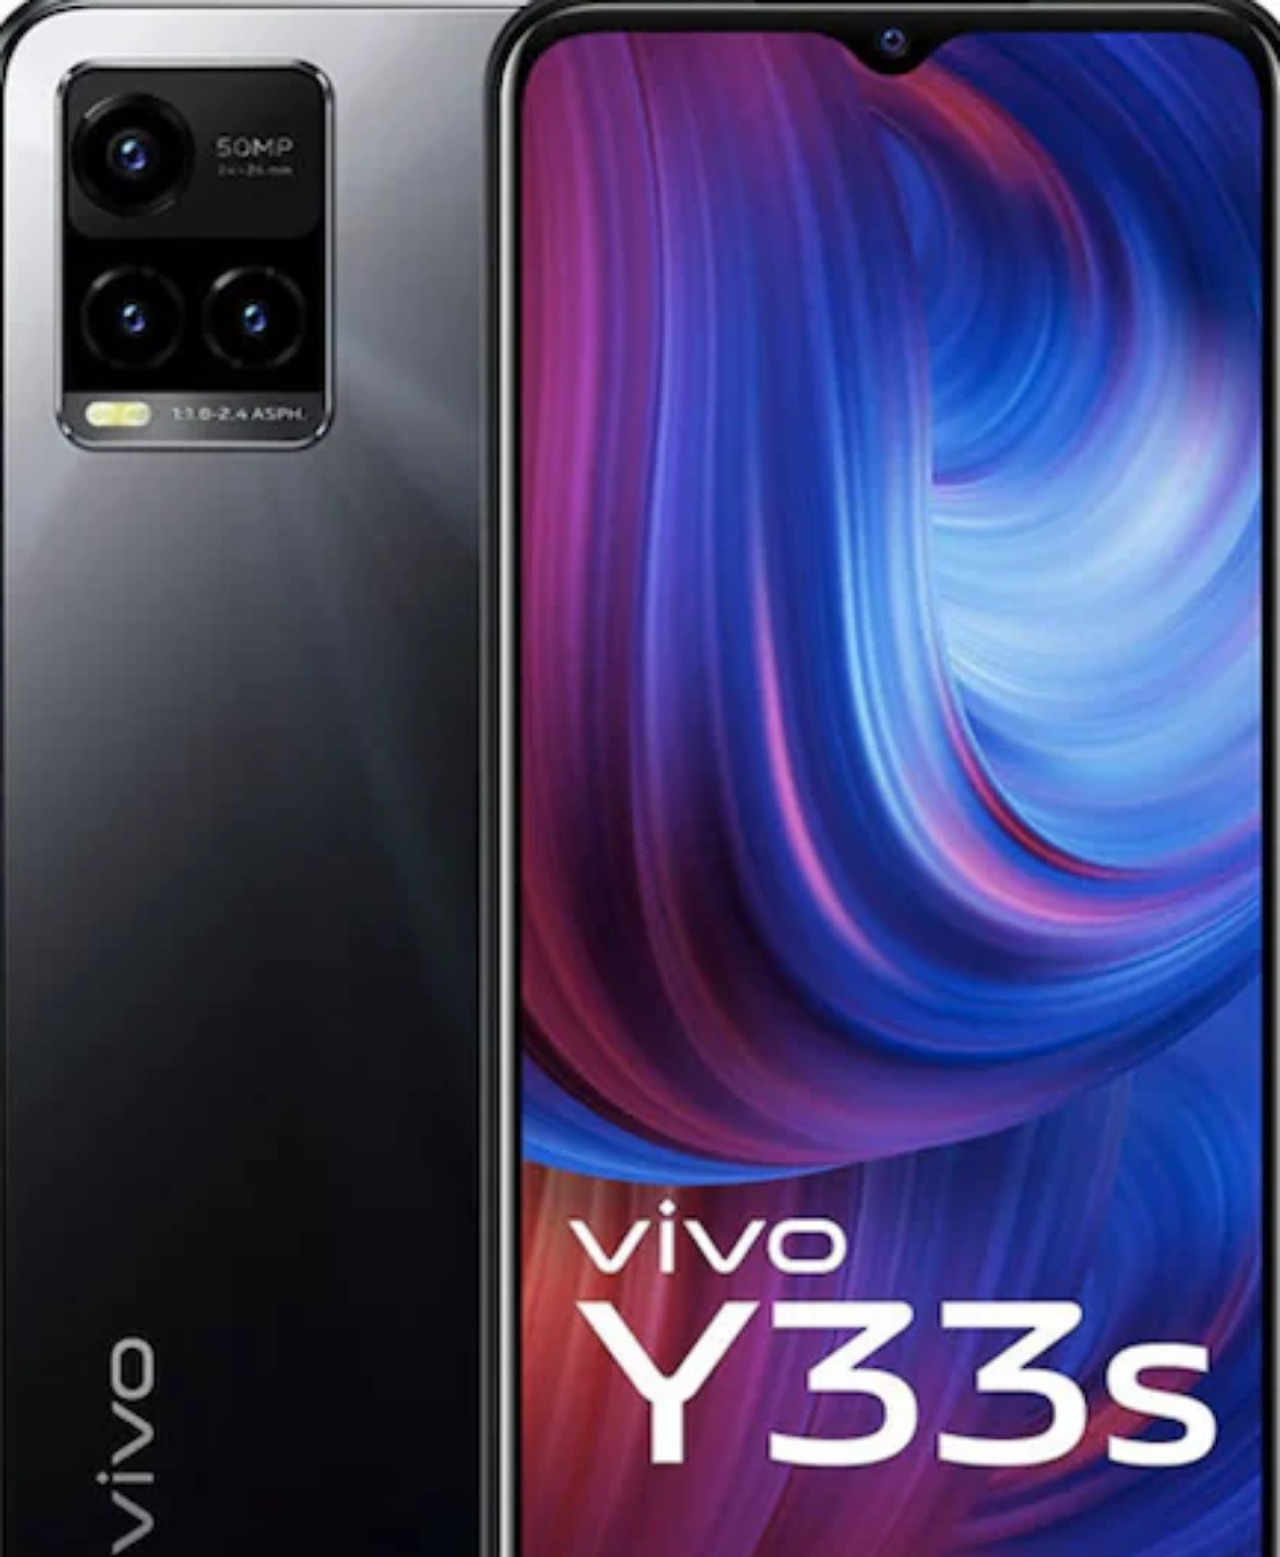 Vivo Y33s Price in India and Specifications: From Camera, Processor to Battery, every spec you need to know of this smartphone.